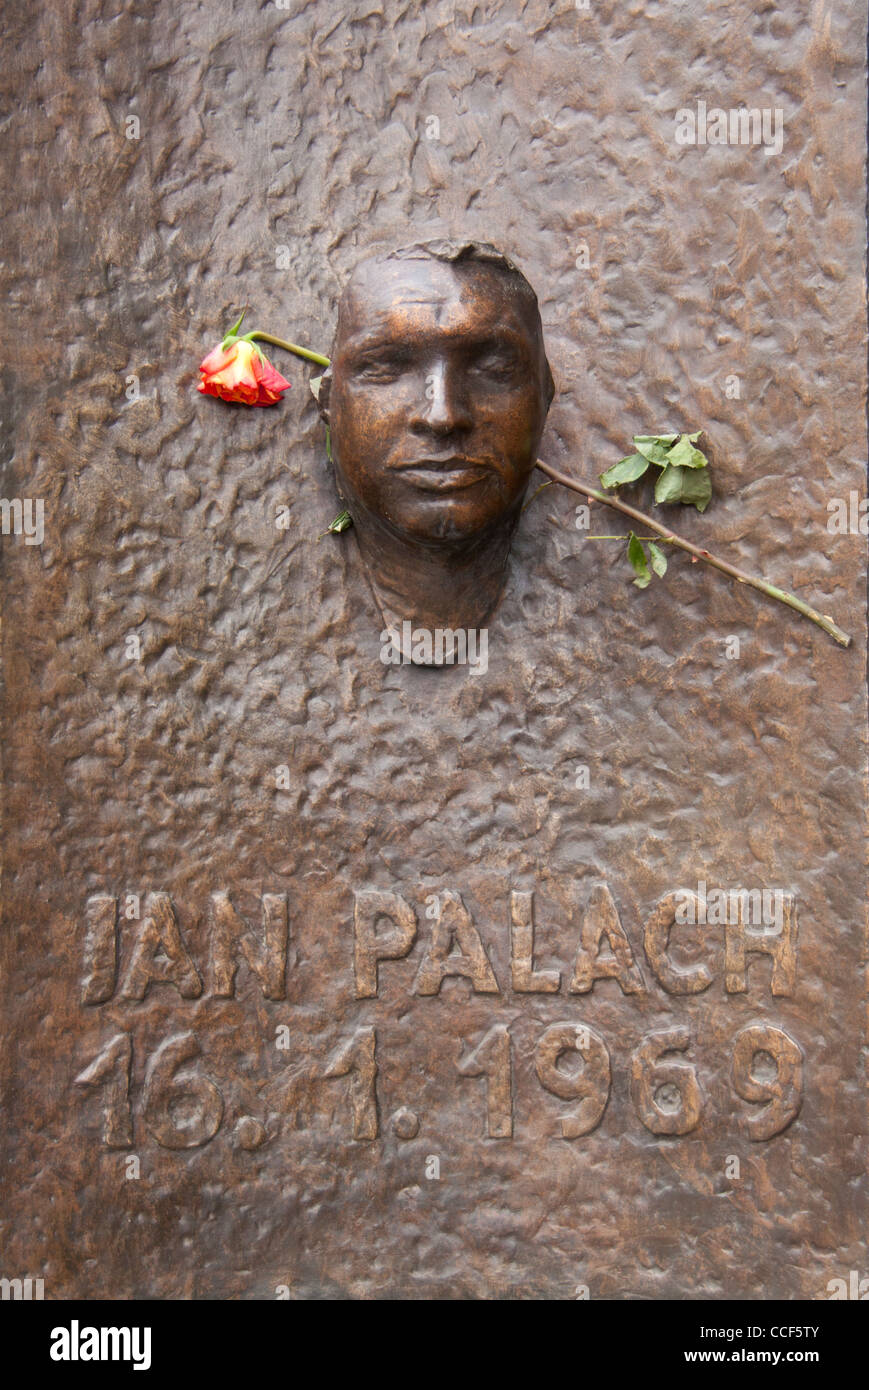 Memorial to Jan Palach who set fire to himself in protest against crushing of Prague Spring in 1969 Prague Czech Republic Europe Stock Photo